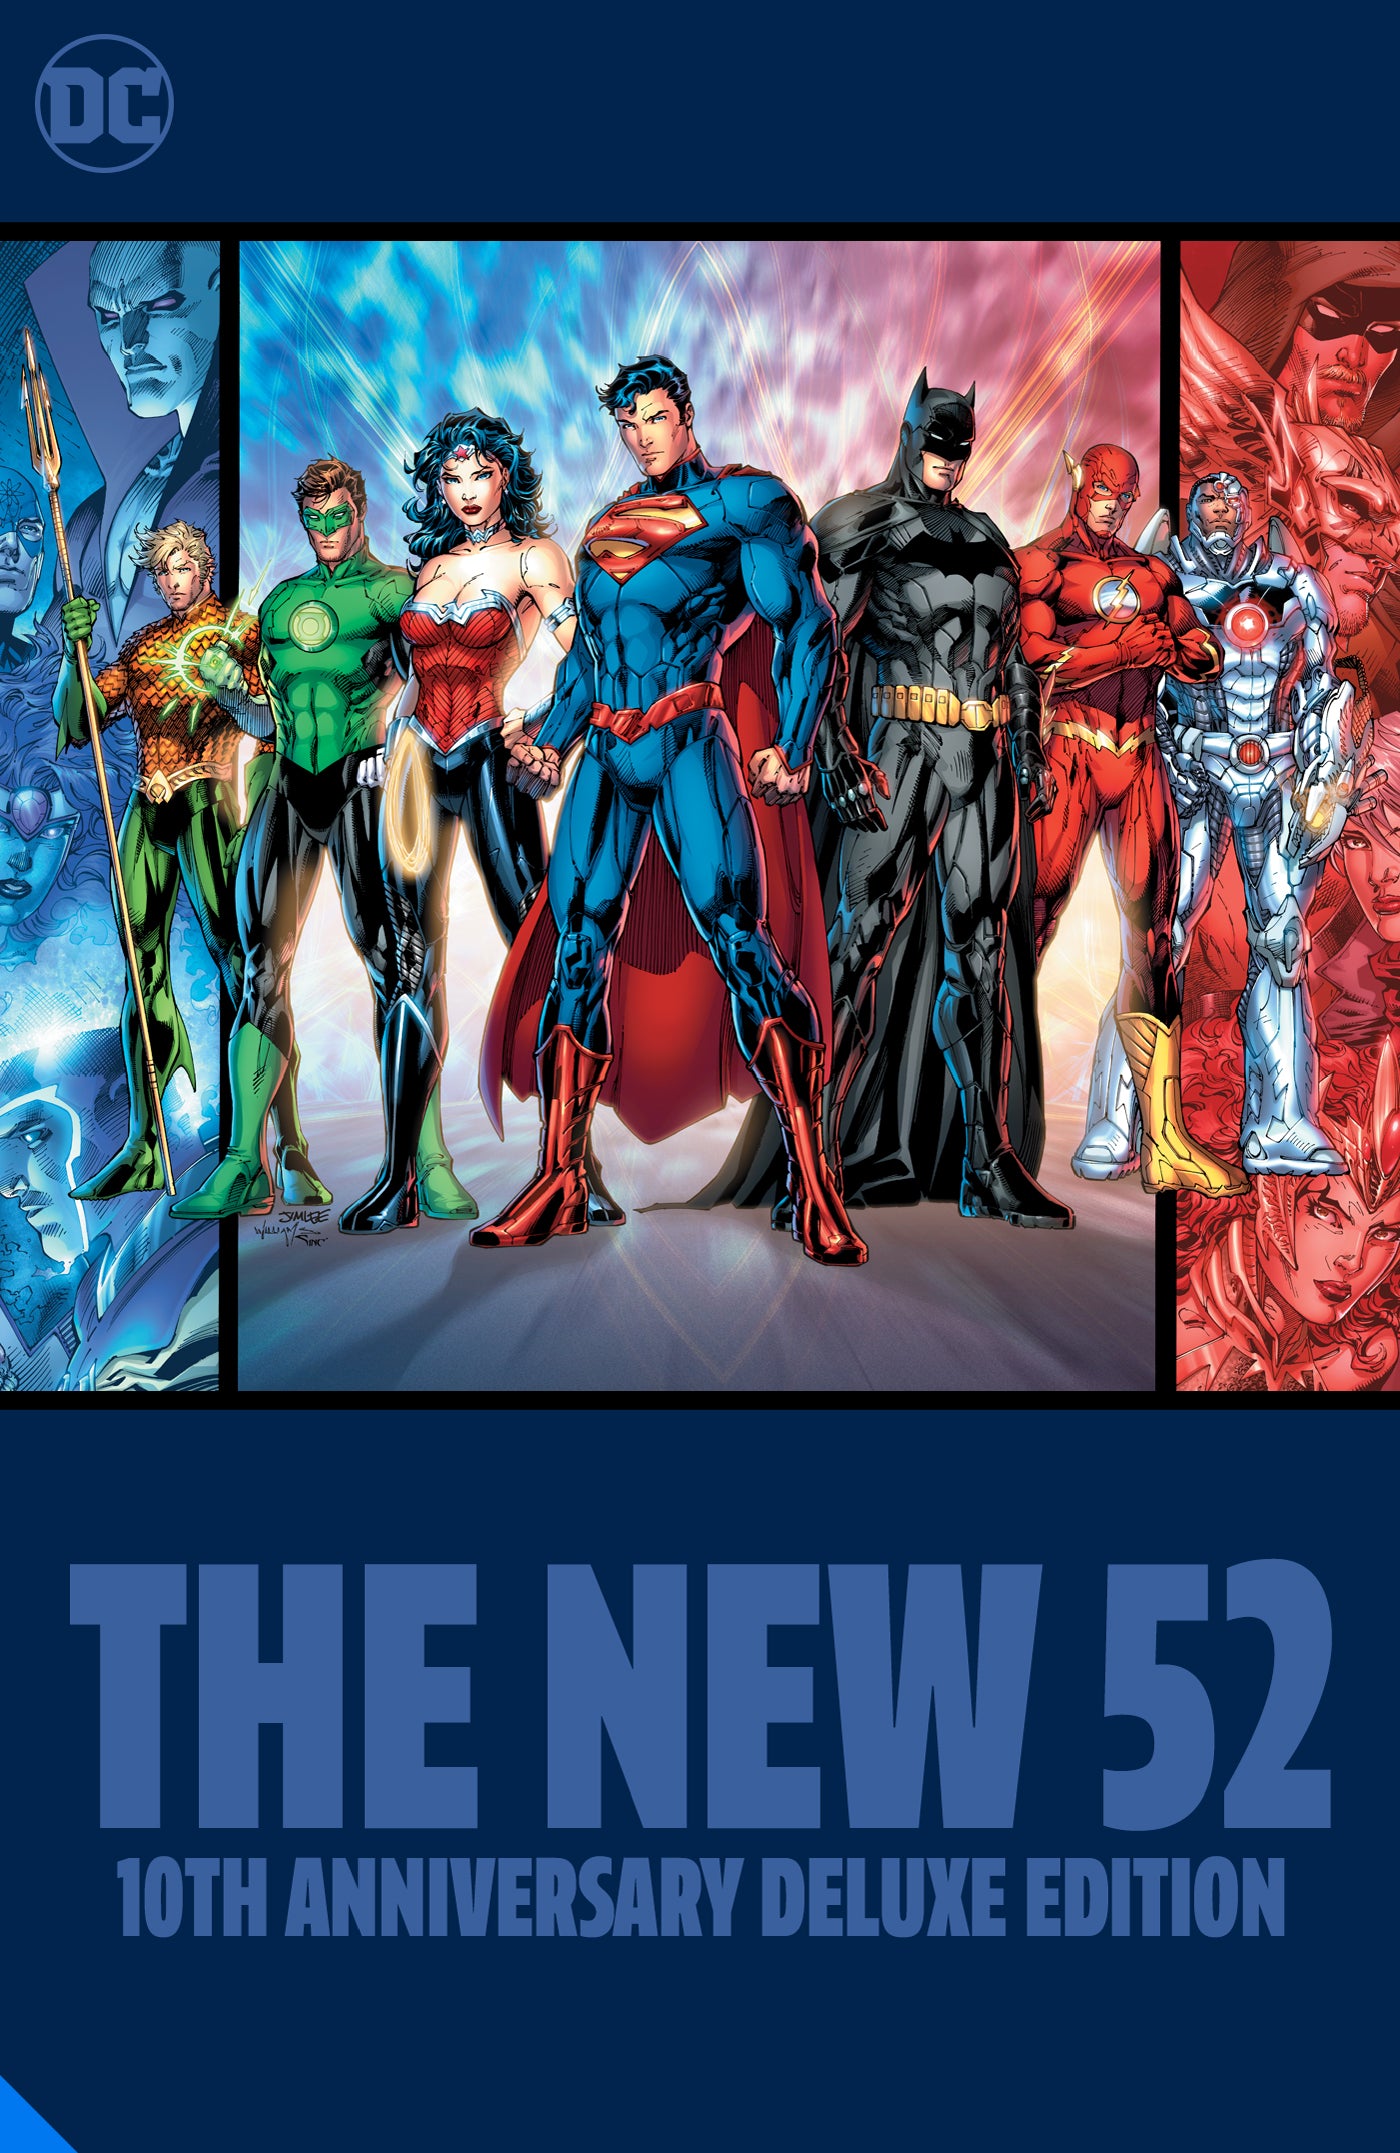 NEW 52 10TH ANNIVERSARY DELUXE EDITION HARDCOVER